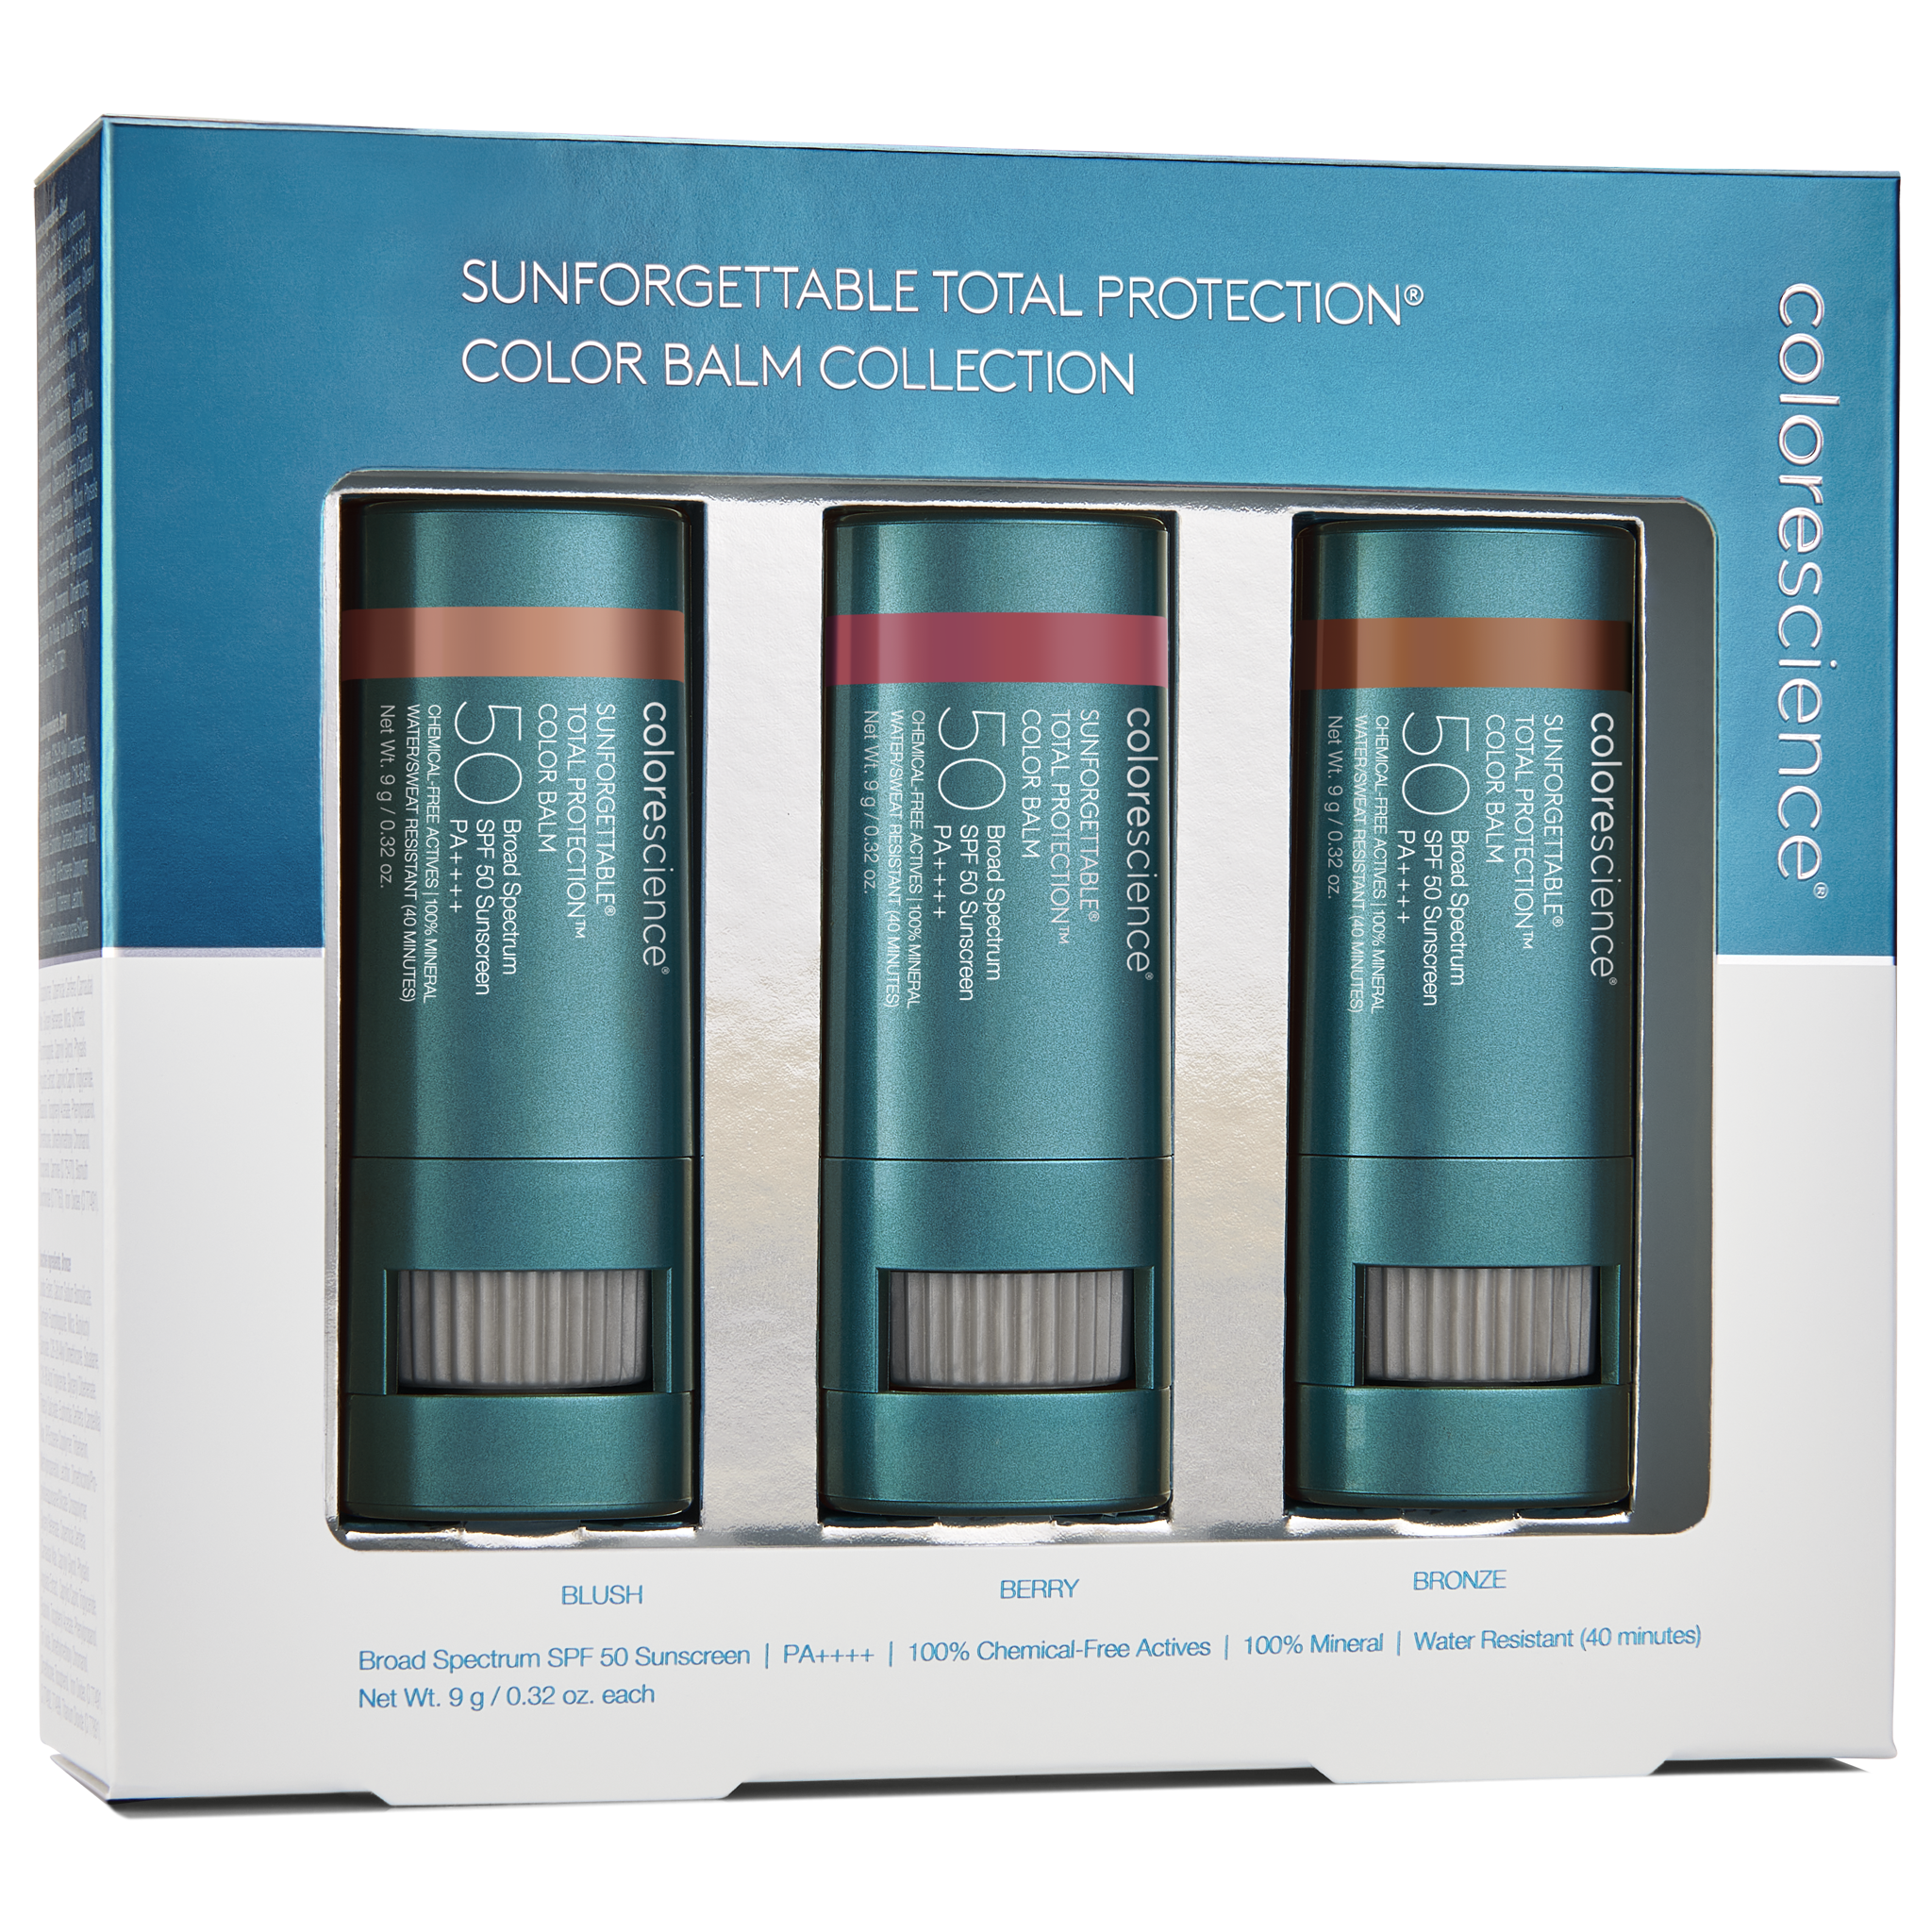 Sunforgettable® Total Protection™ Color Balm SPF 50 Collection